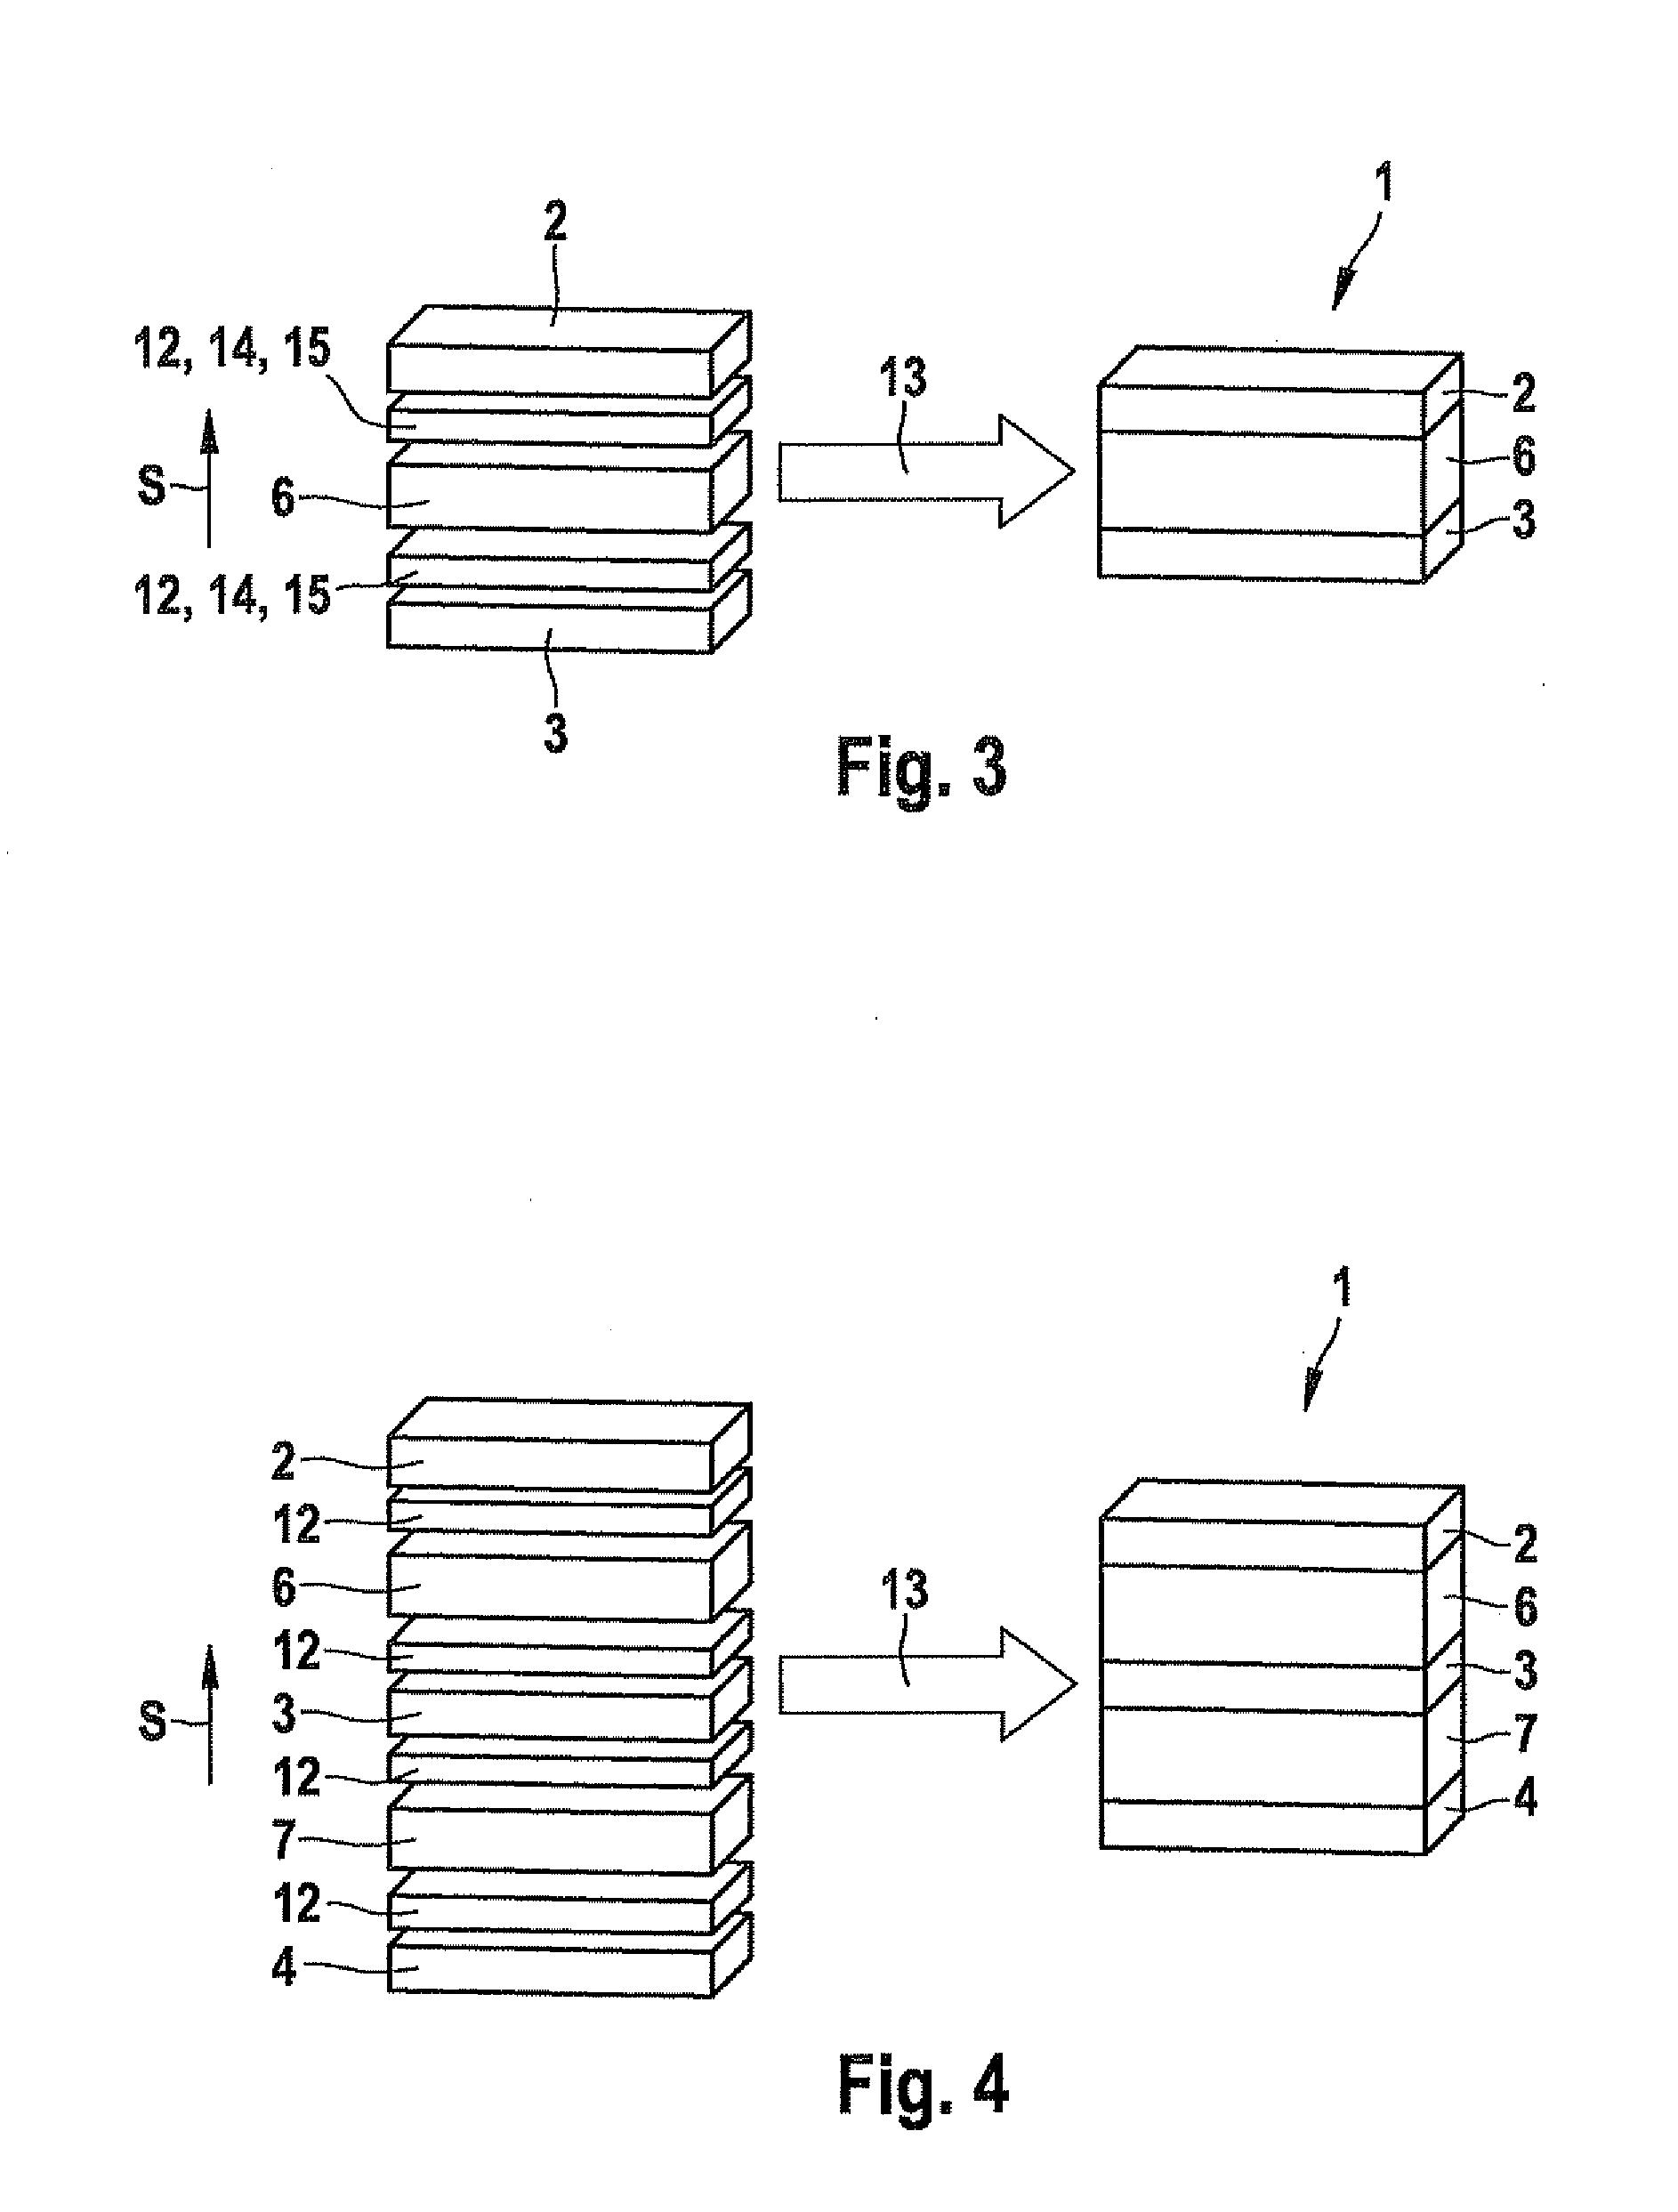 Electrical or electronic composite component and method for producing an electrical or electronic composite component